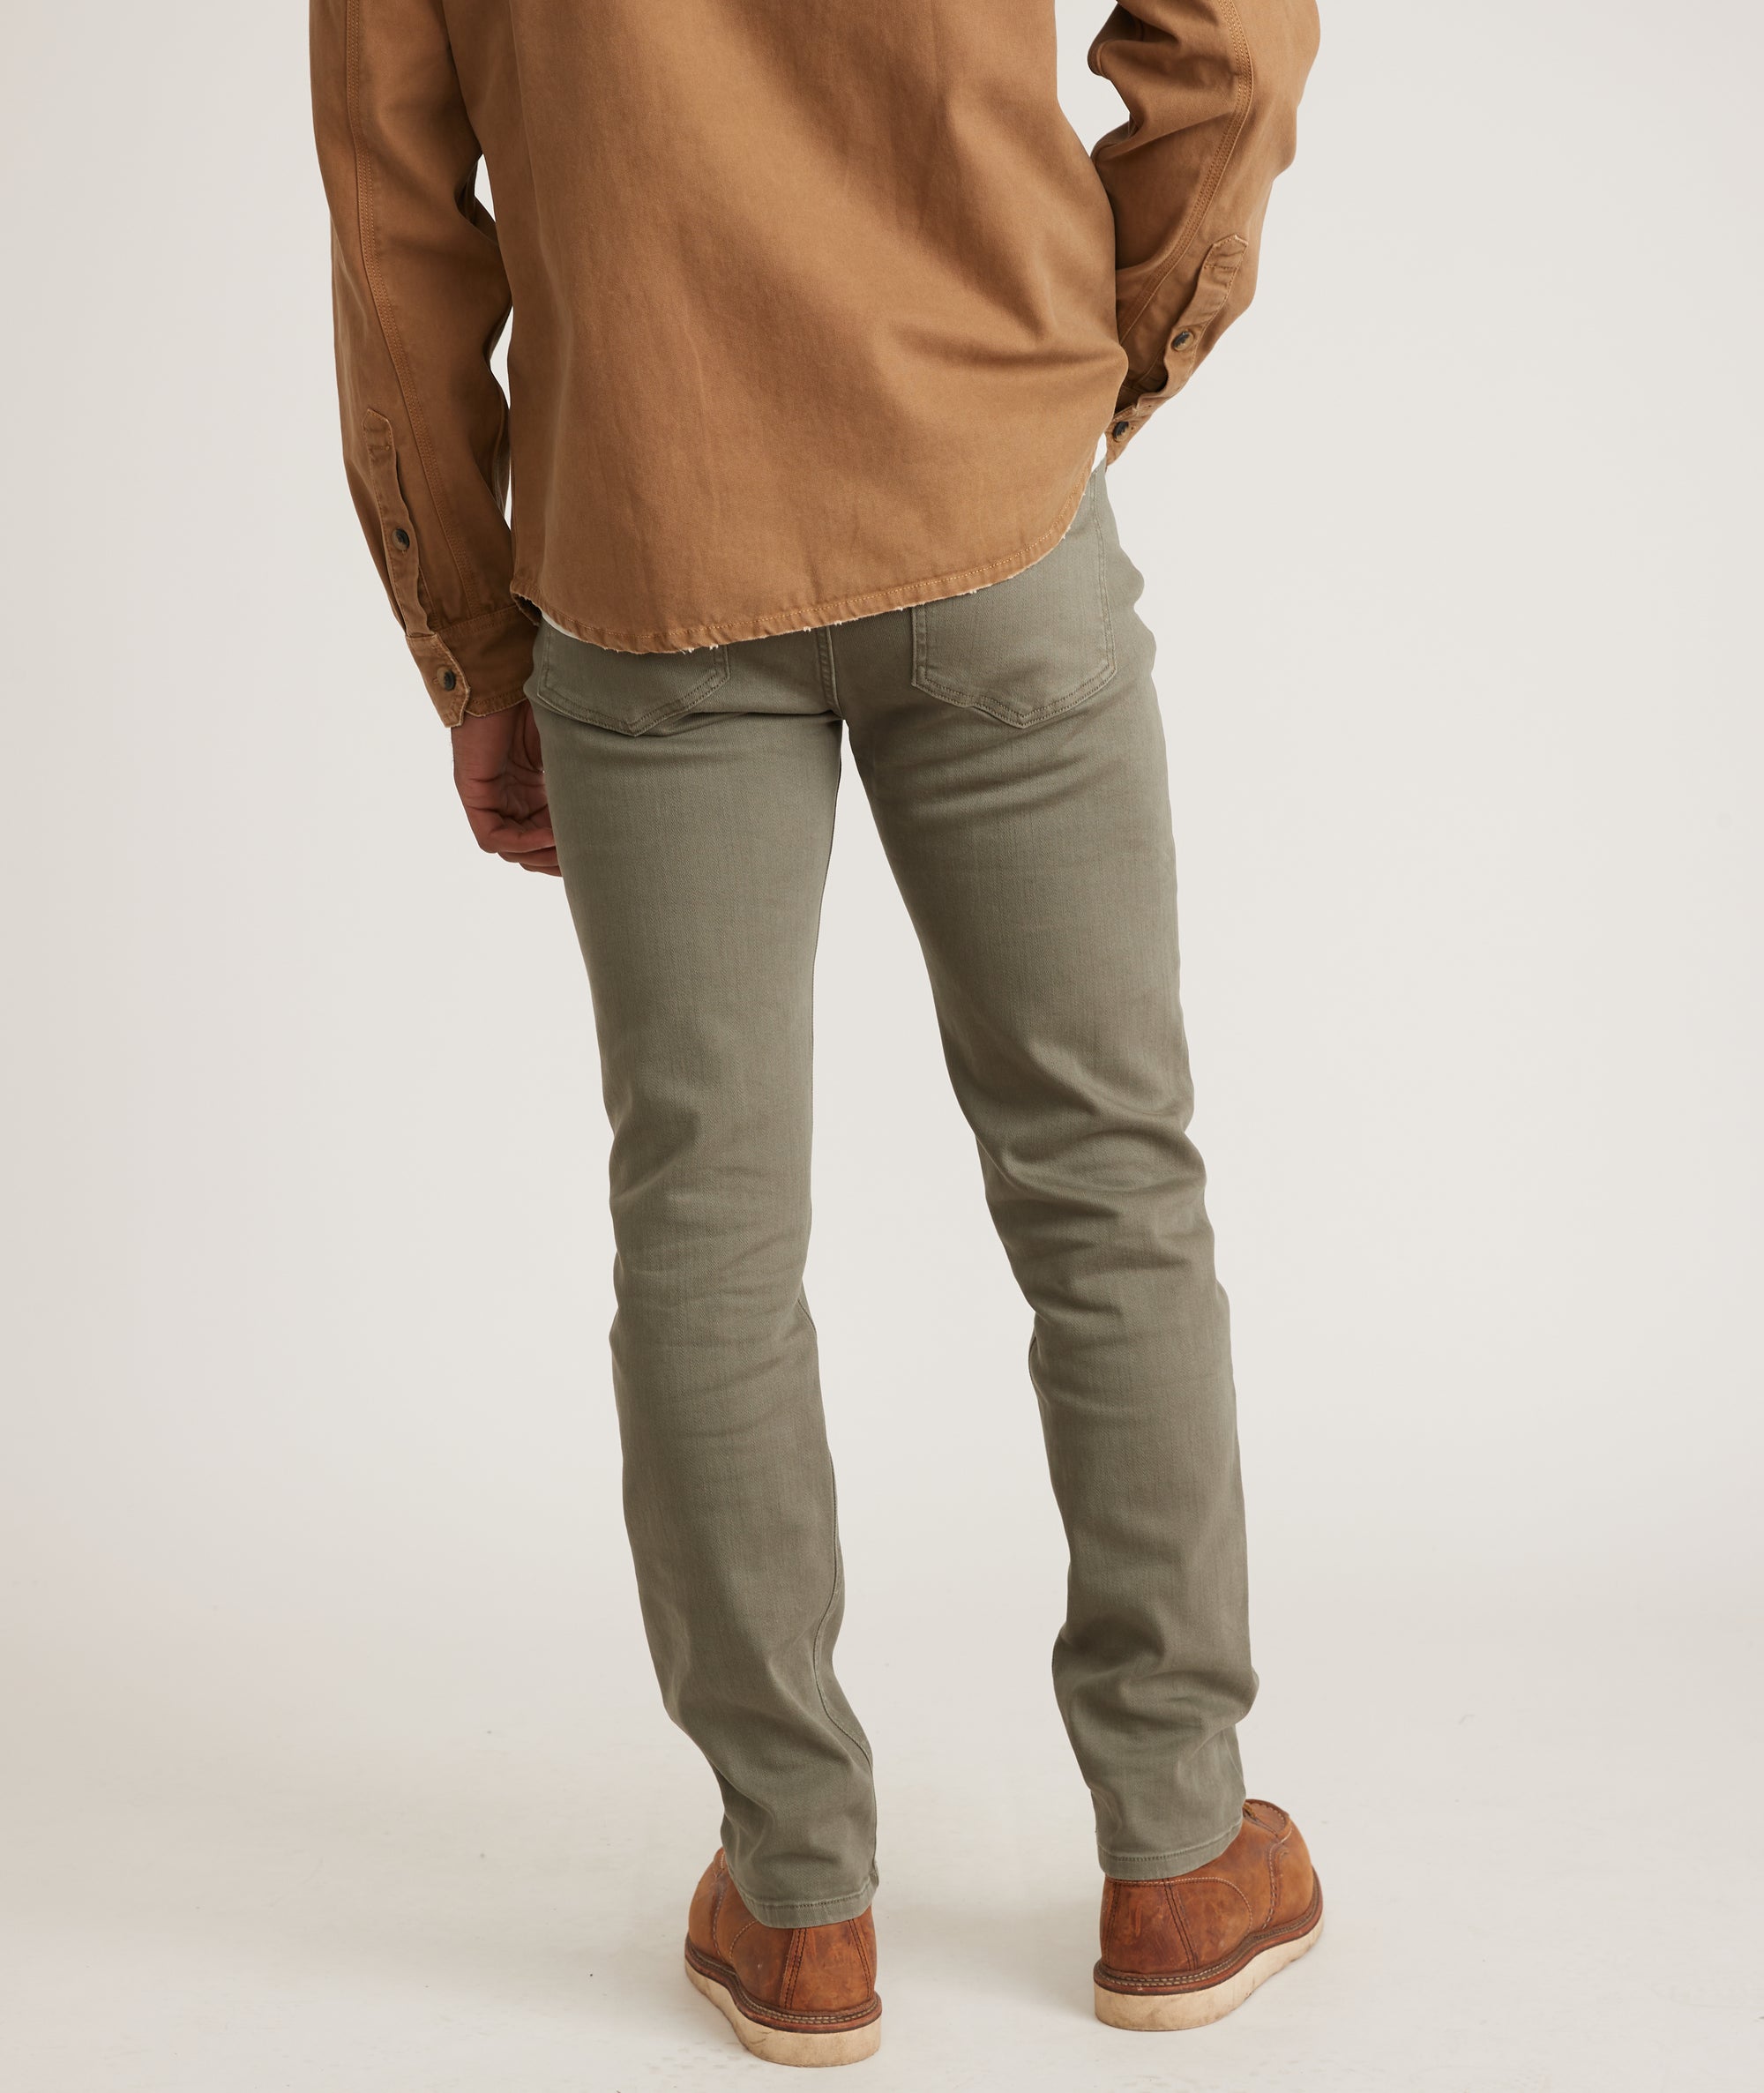 Pant in Olive Faded Slim Marine Layer 5 Pocket – Fit